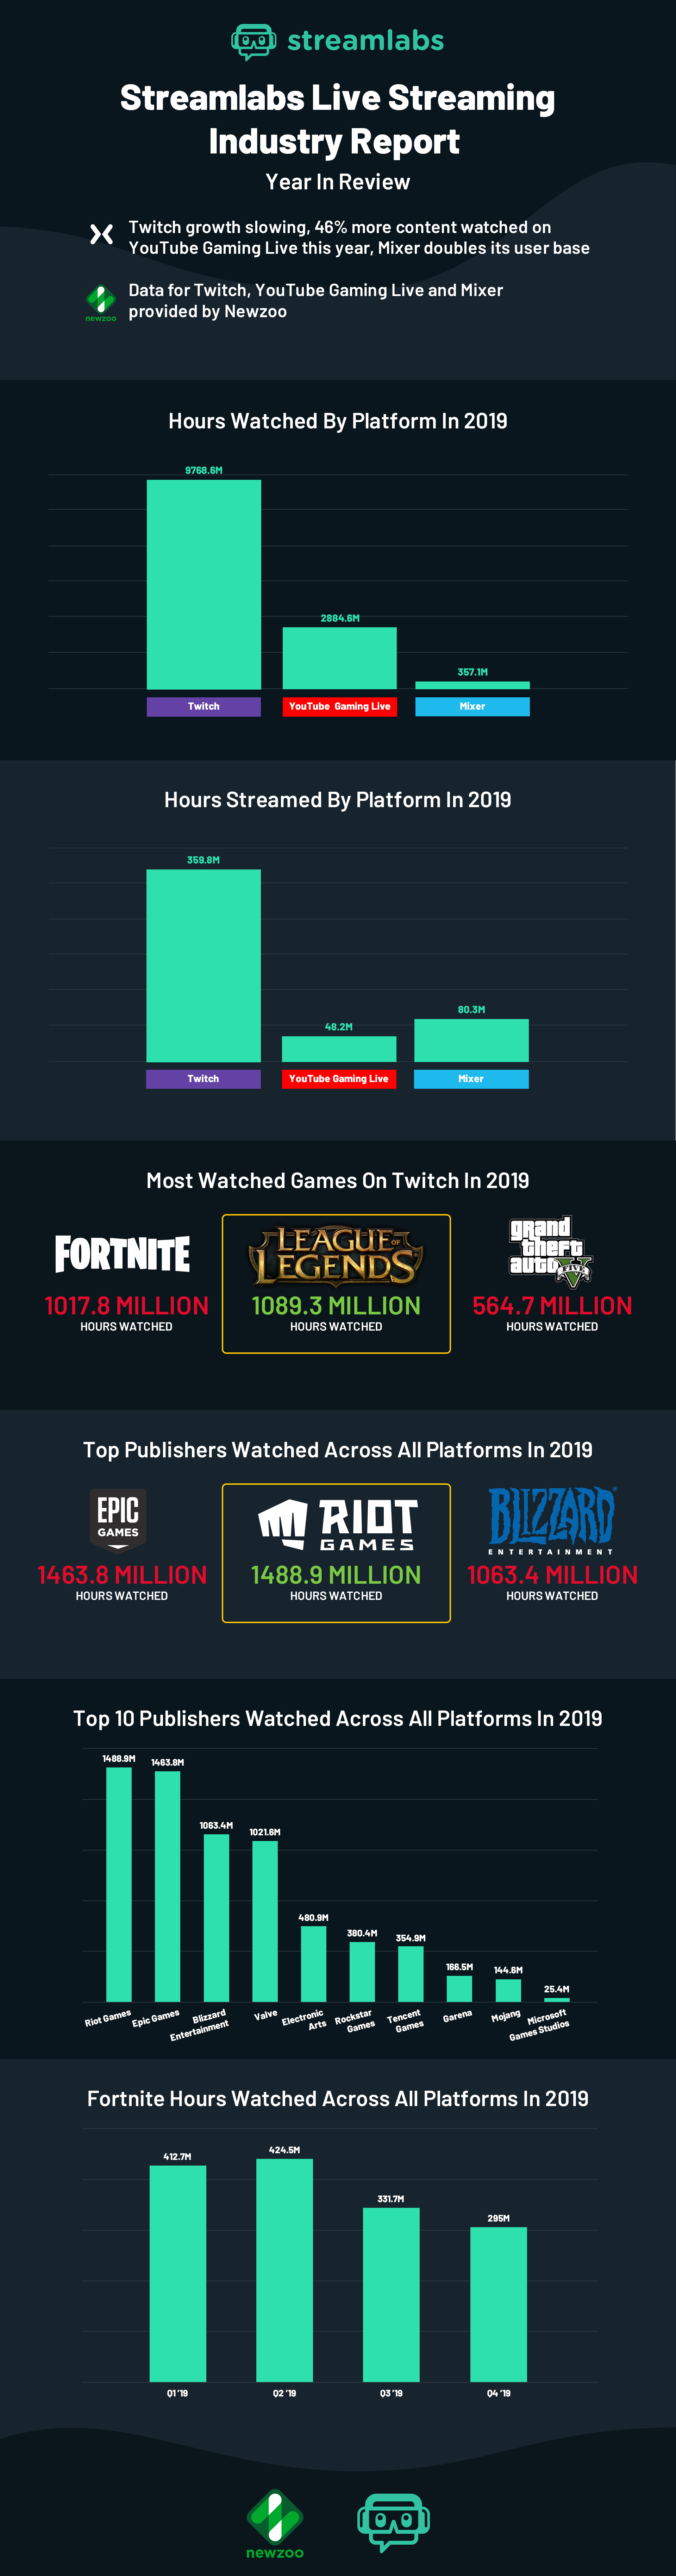 Best streaming platform in 2019 according to Streamlabs and Newzoo report 5